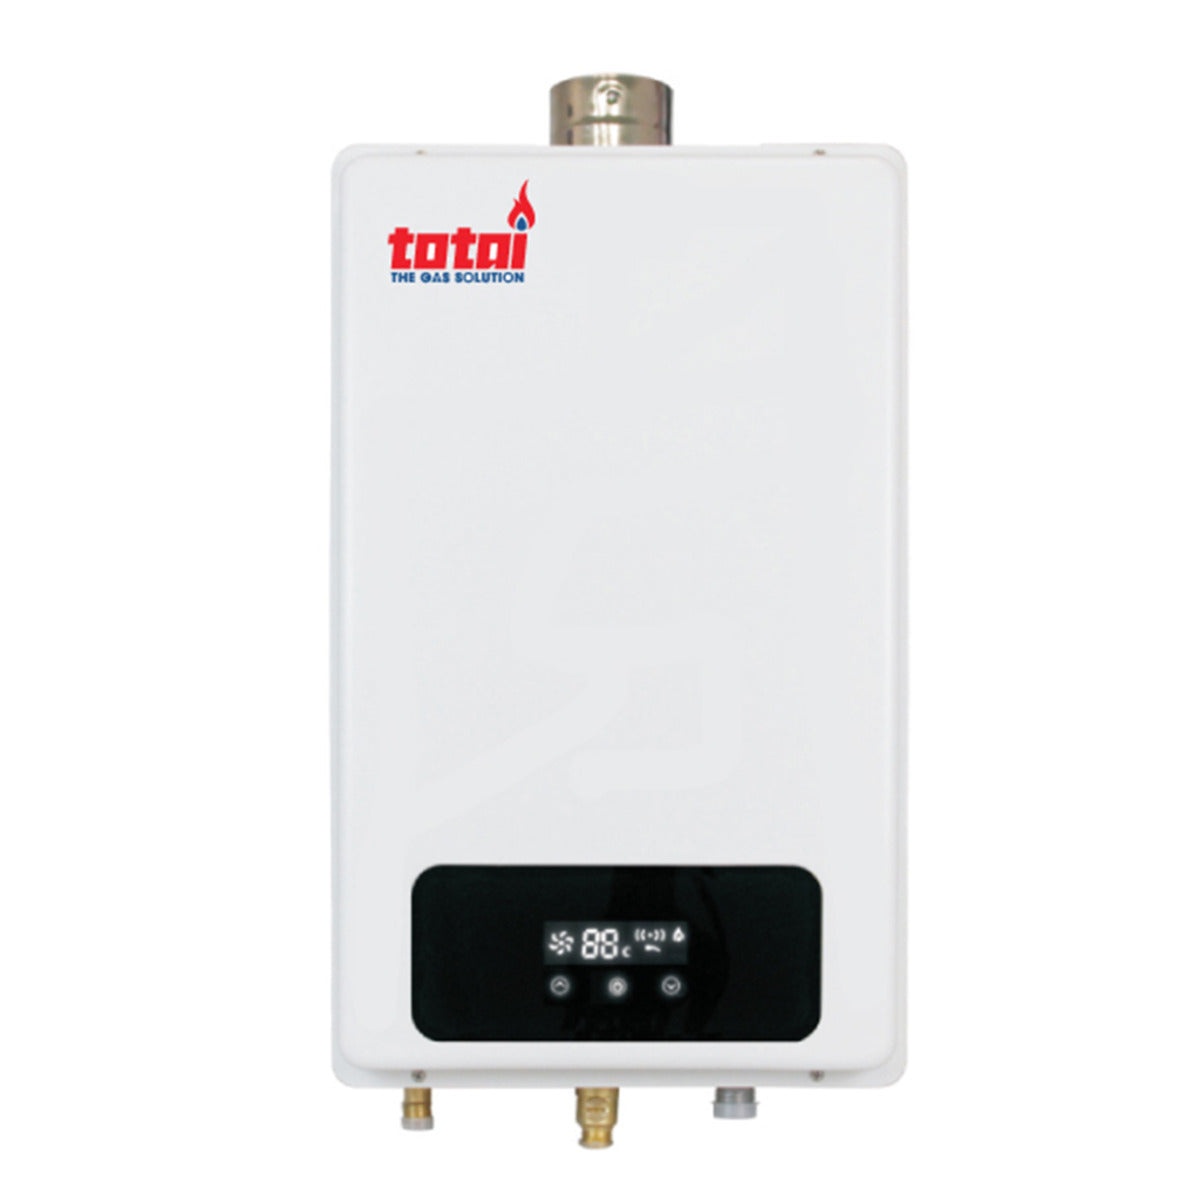 Totai 20 Litre Fan Assisted Gas Water Heater with Electronic Control